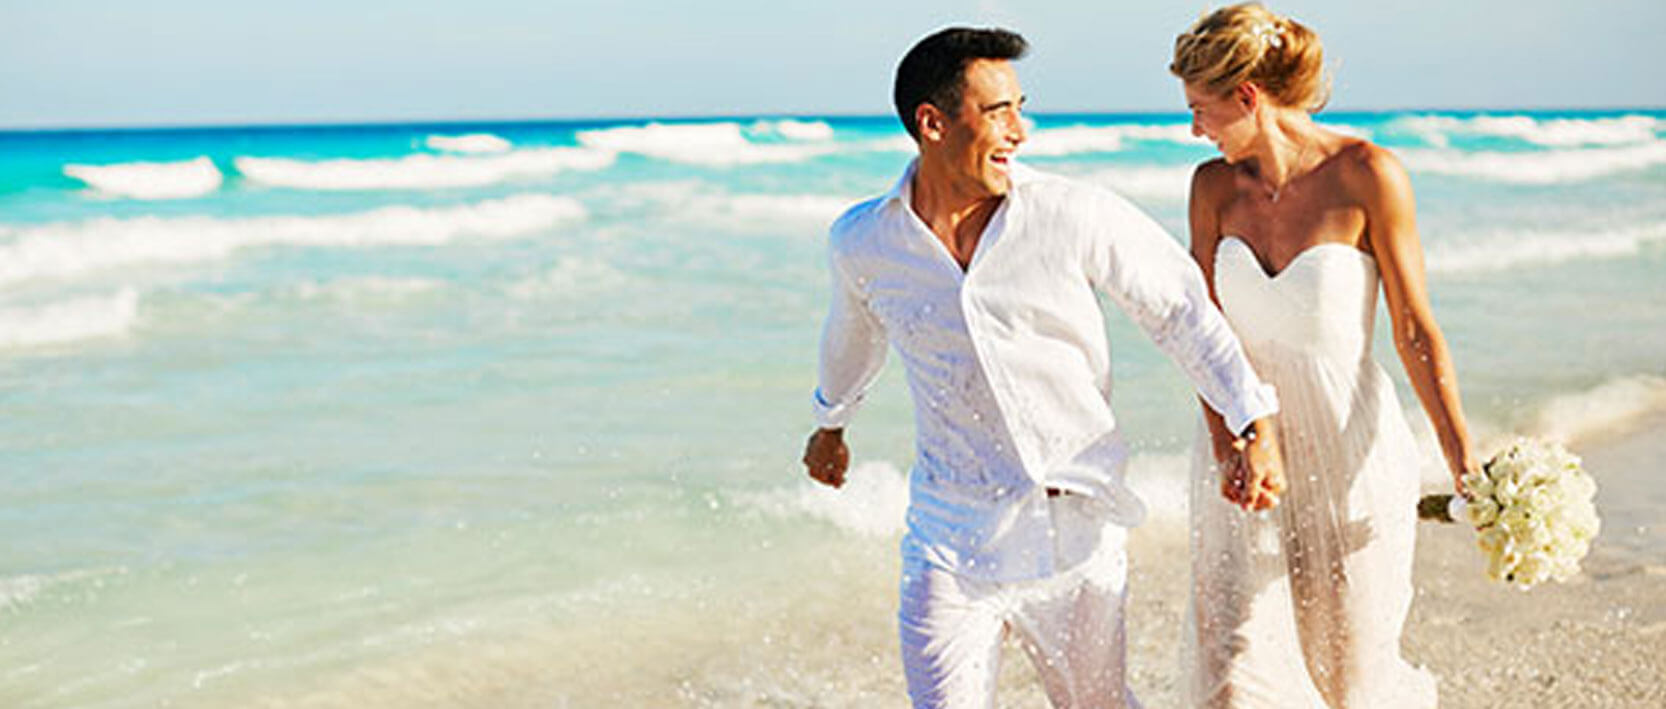 Gran Caribe Cancun Spa - For Just the Two of You Wedding Package